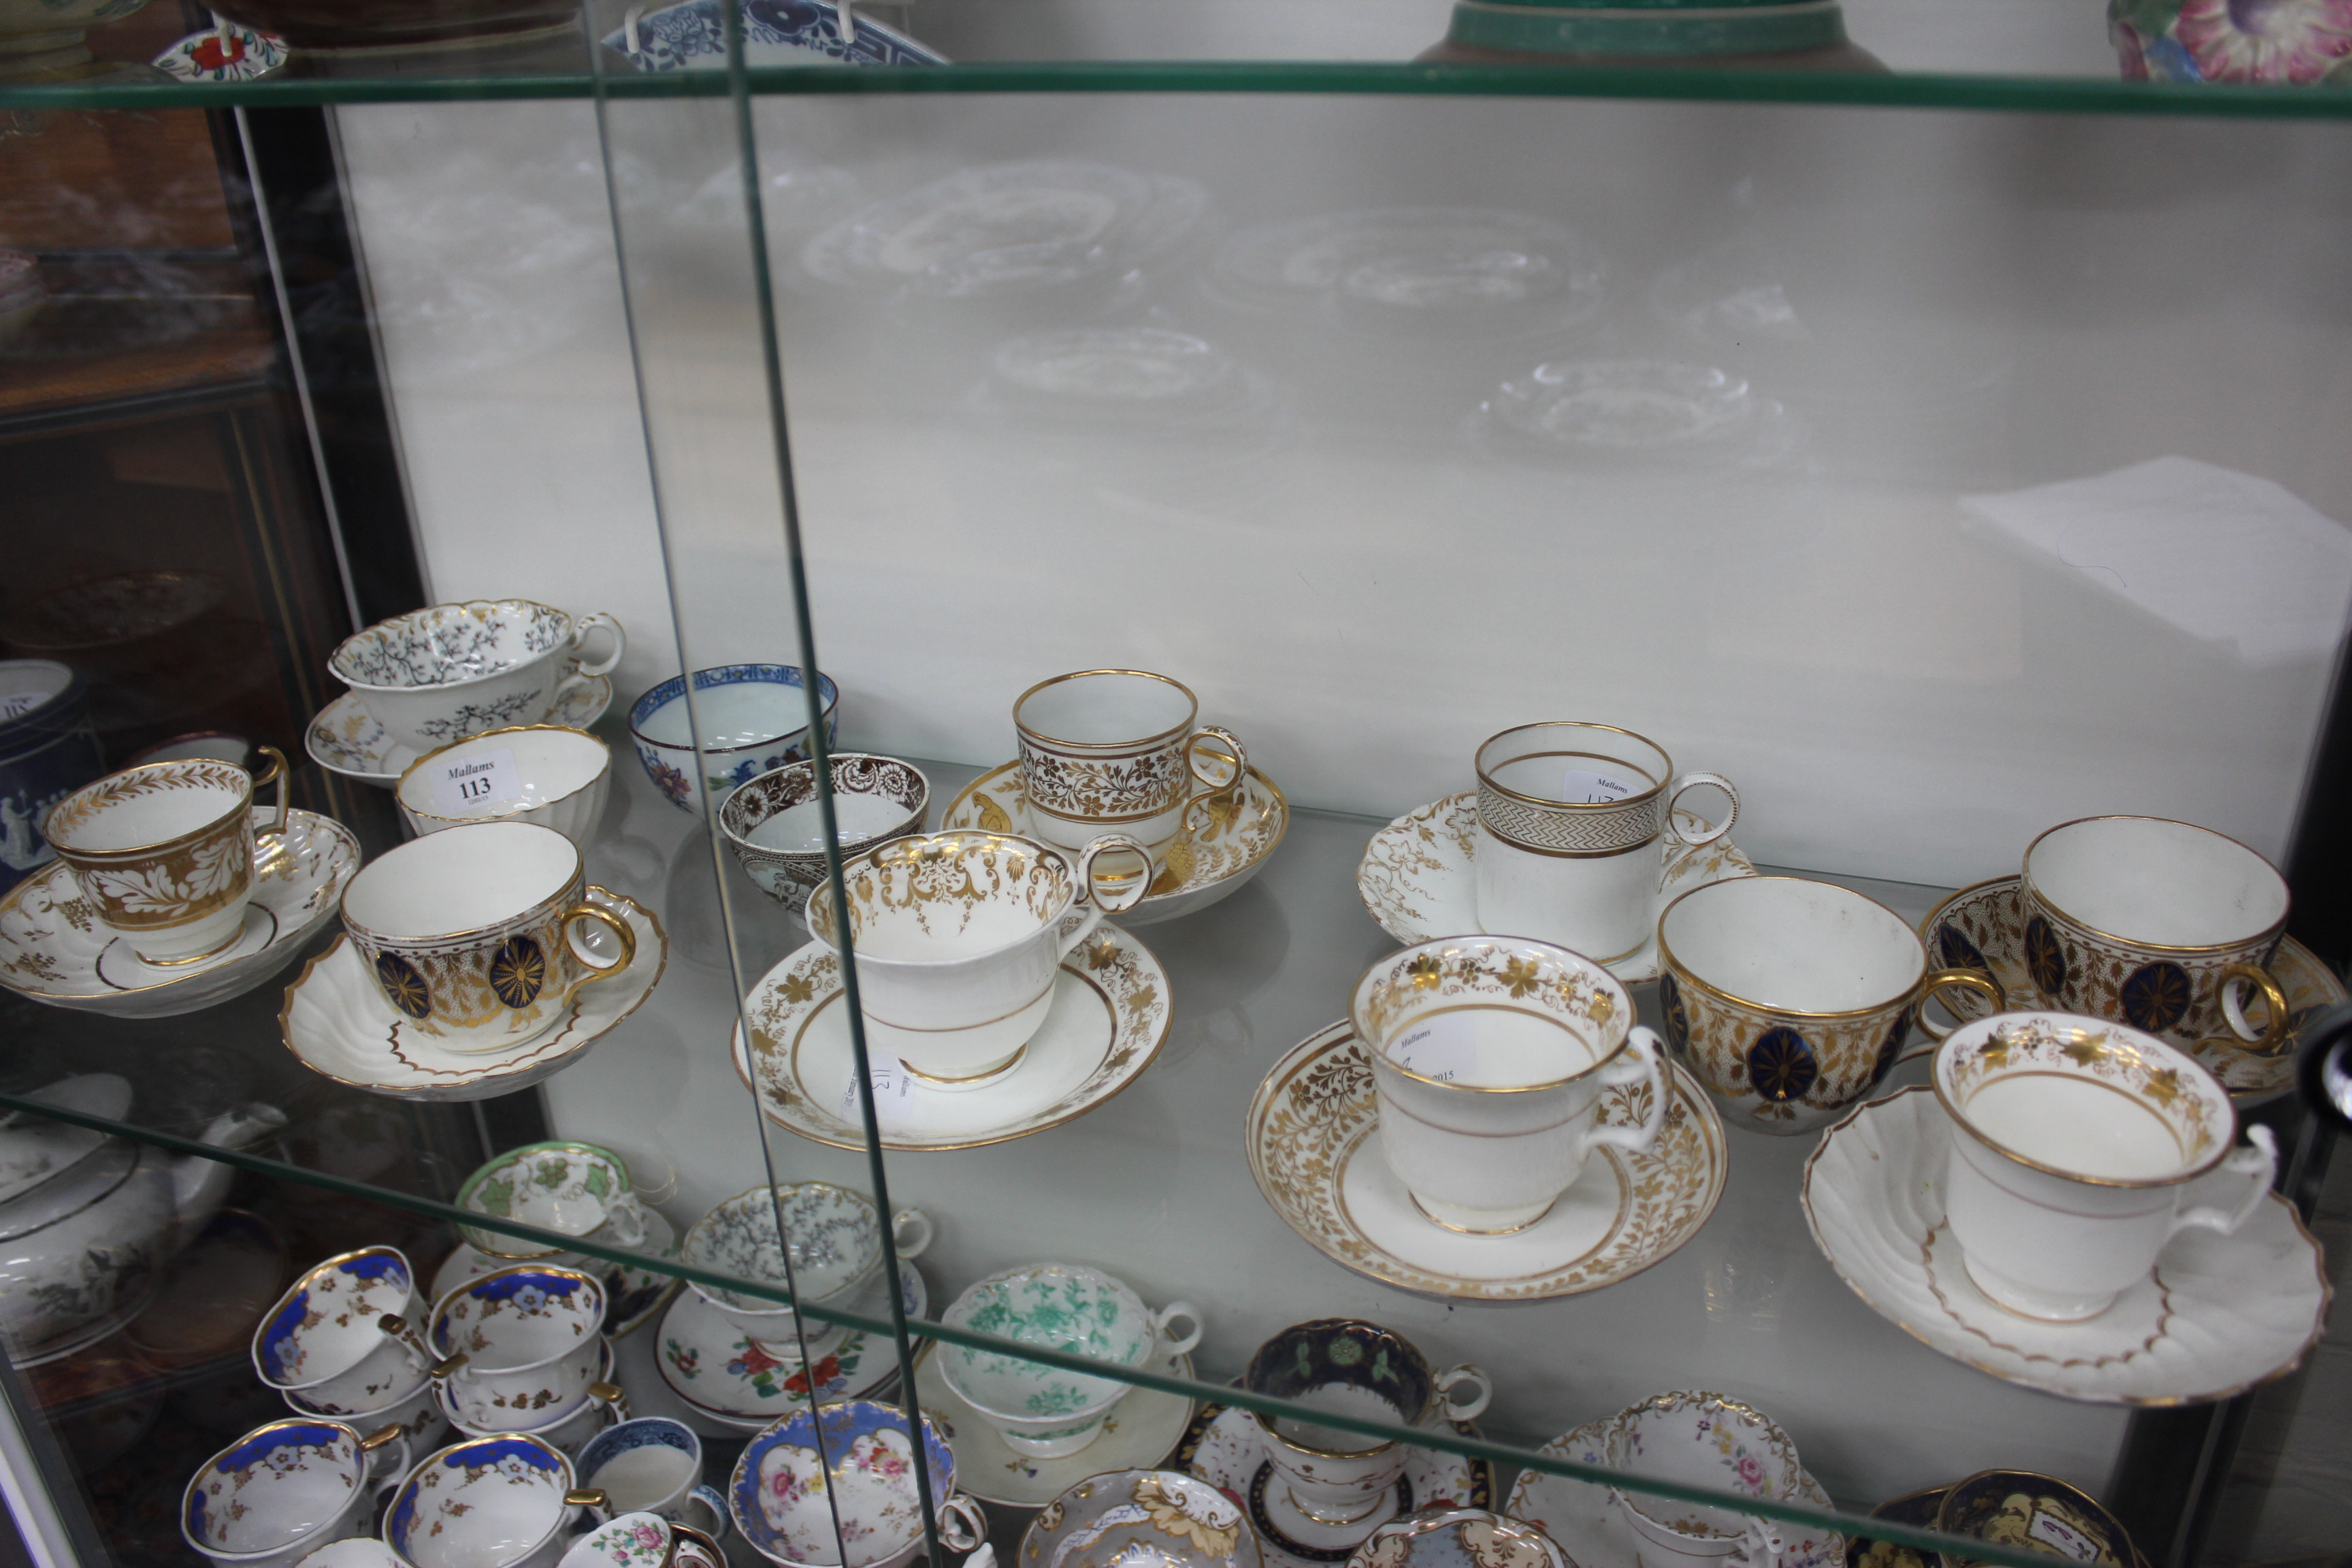 A COLLECTION OF ANTIQUE PORCELAIN TEACUPS and saucers